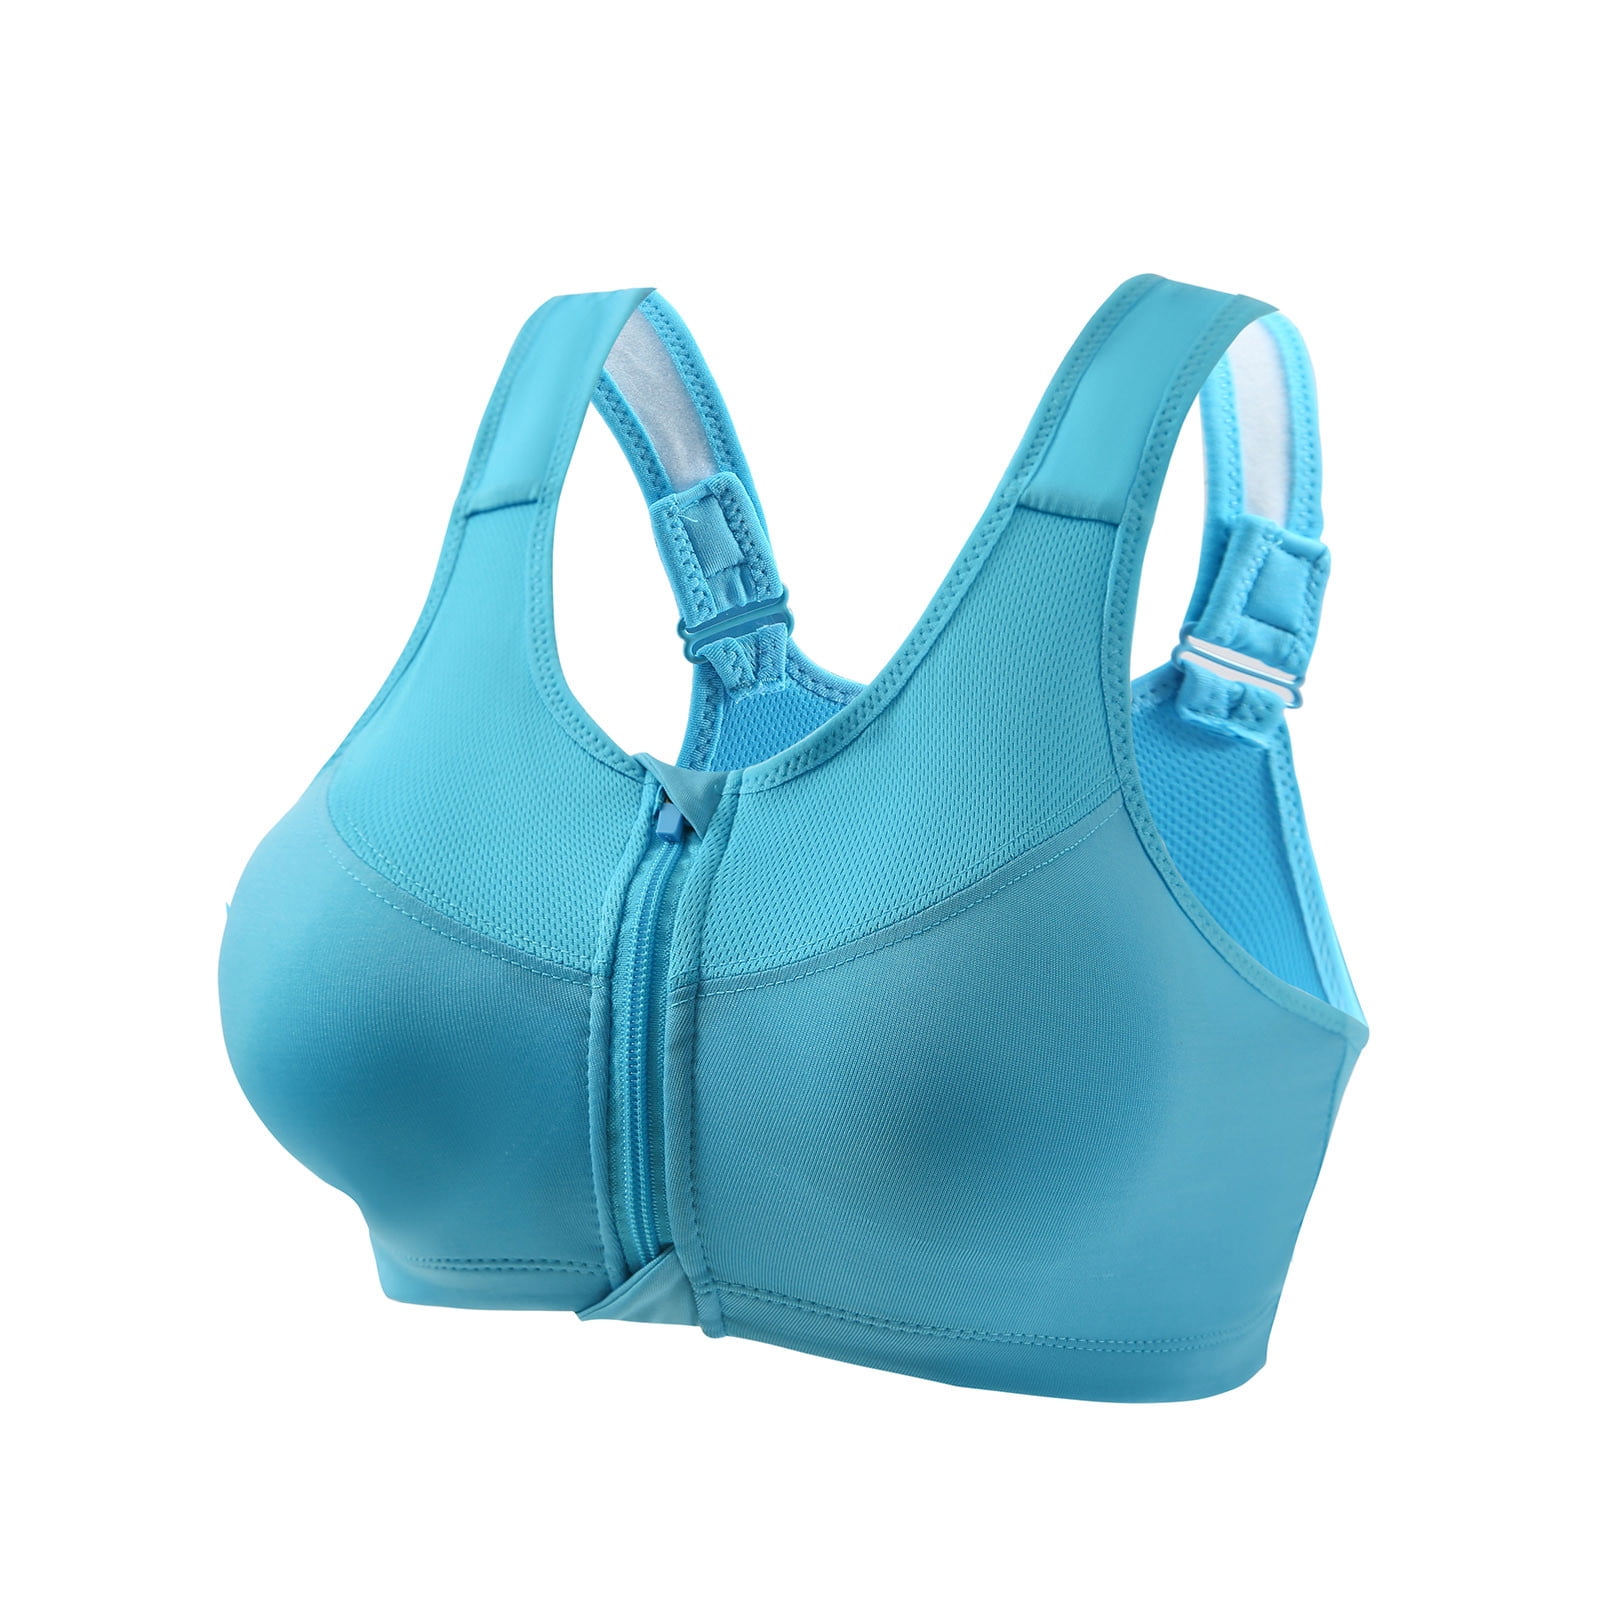 Women's strong support bra with crossed straps - blue